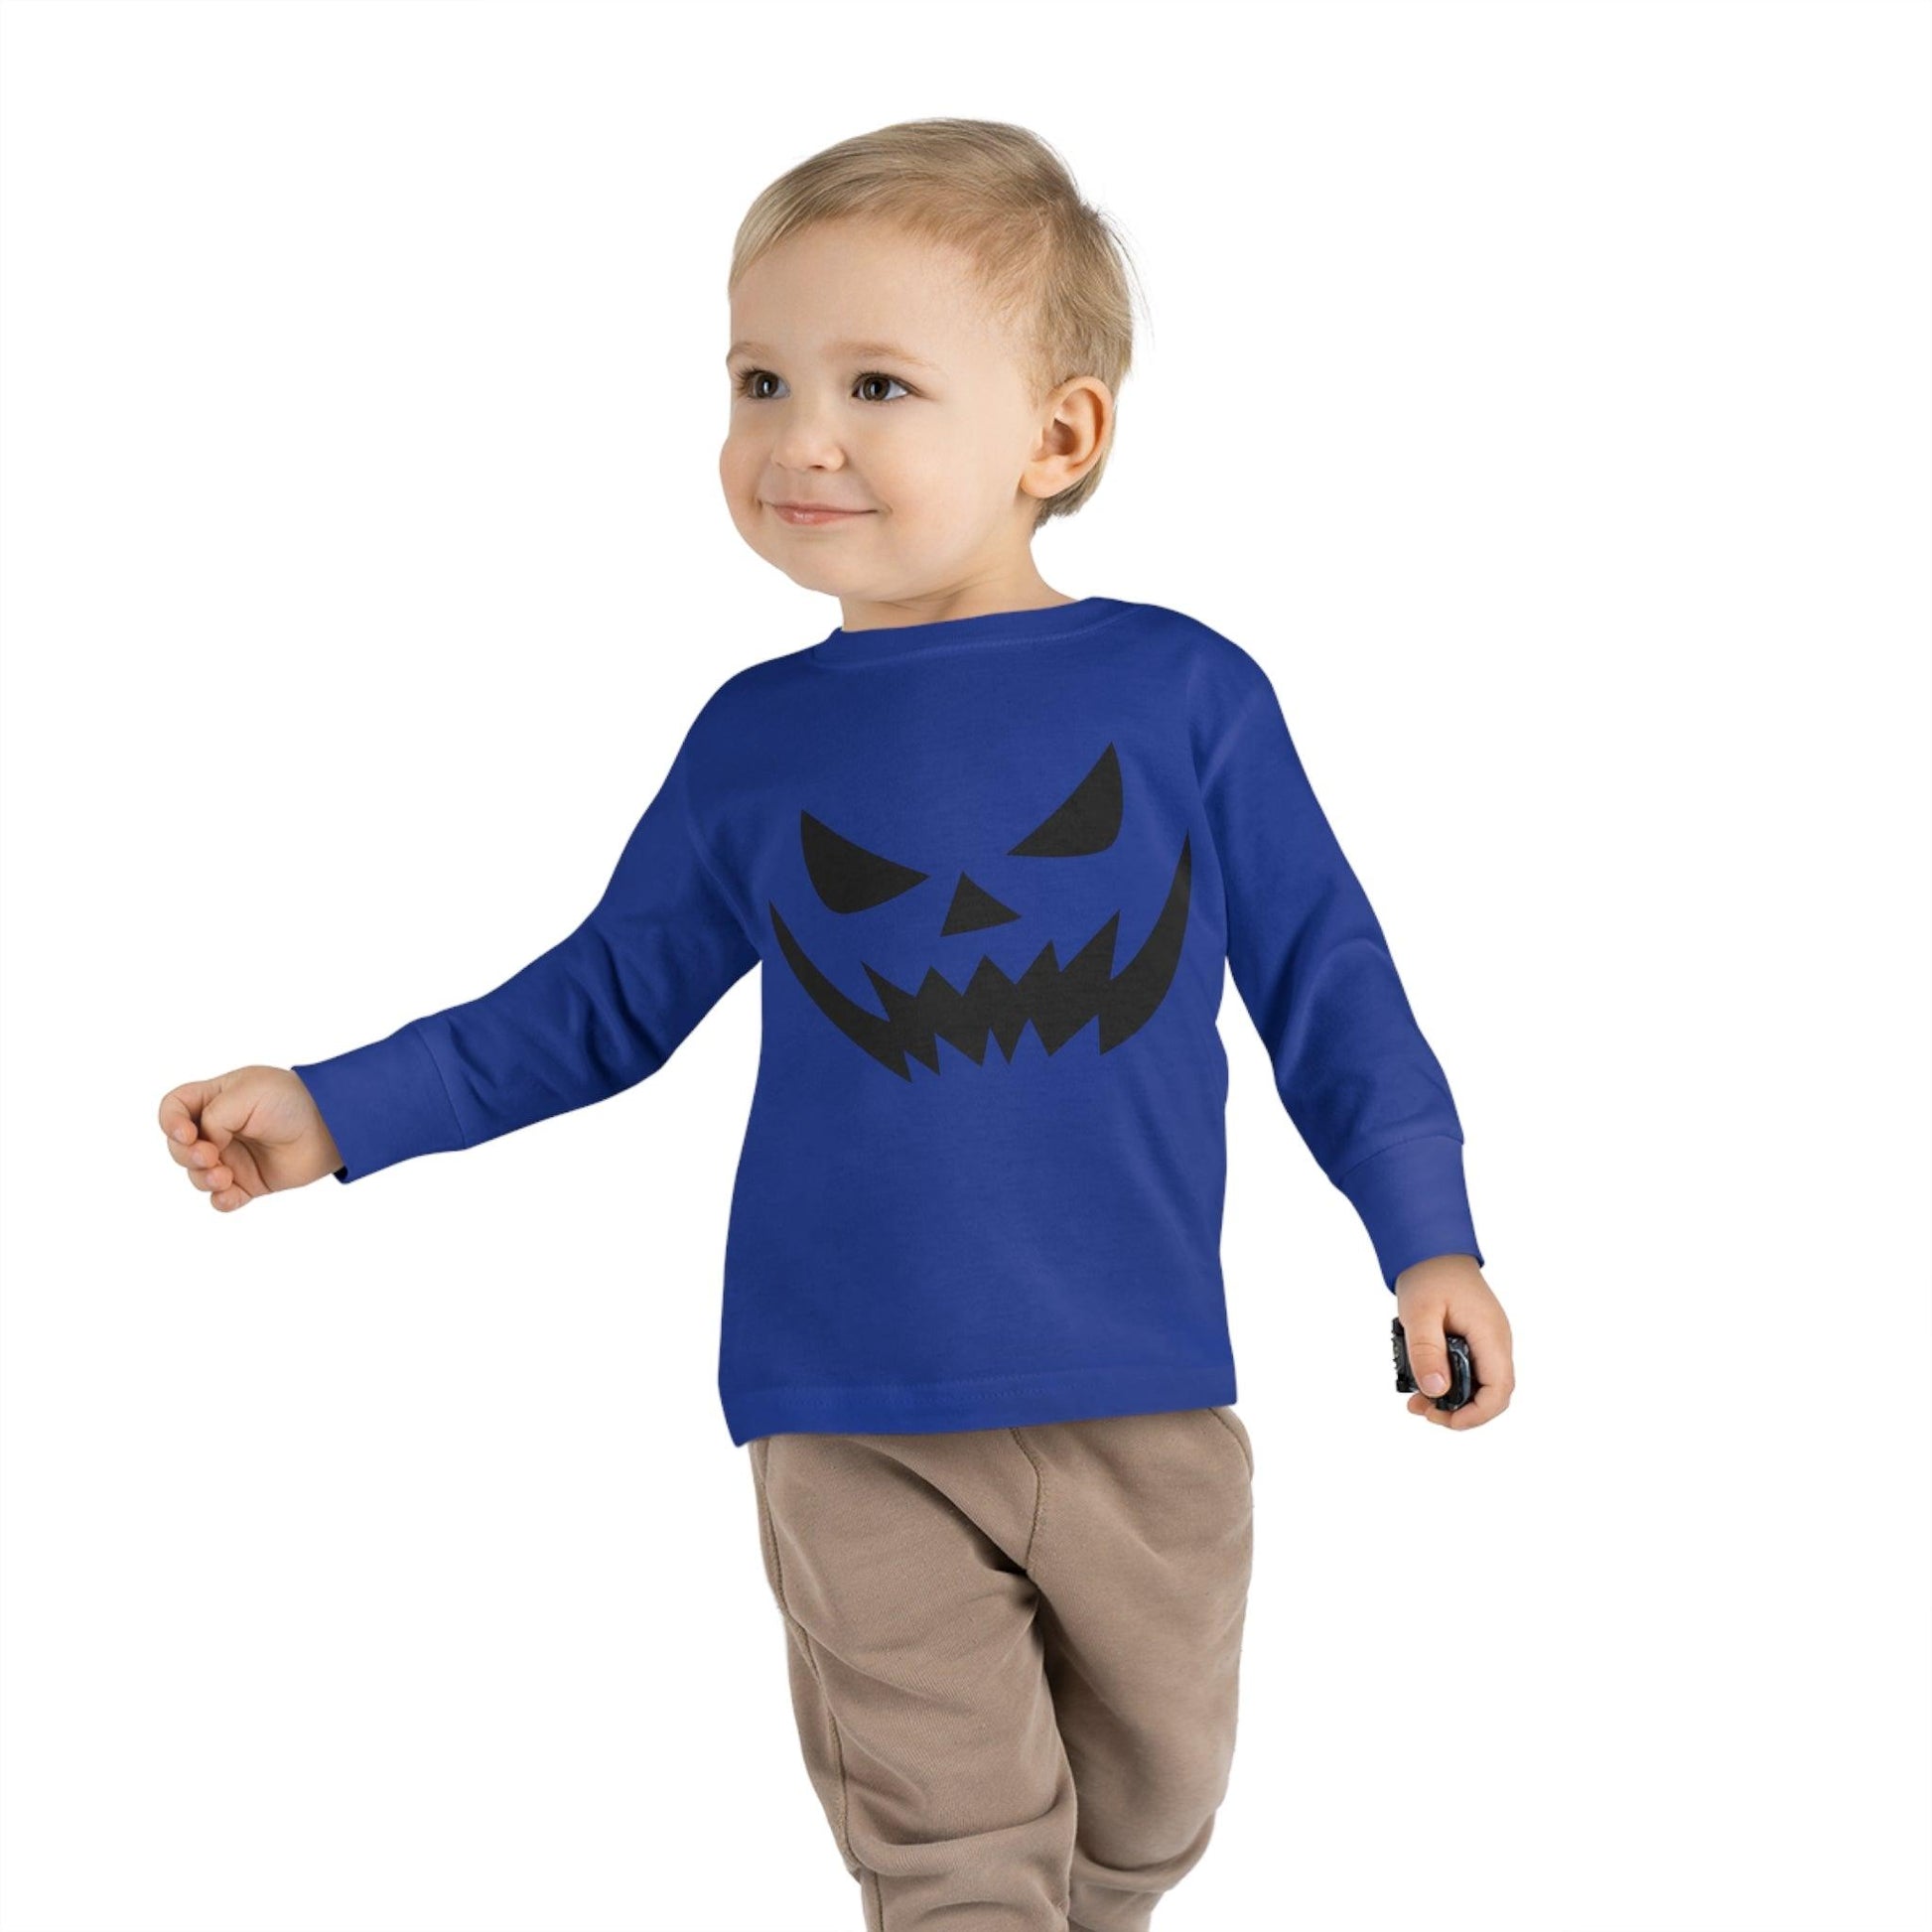 Kids Scary Faces Shirt Halloween Pumpkin Face Shirt Kids Jack O Lantern Shirt Kids Halloween Shirt Kids Long Sleeve Trick or Treat Outfit for Halloween - Giftsmojo